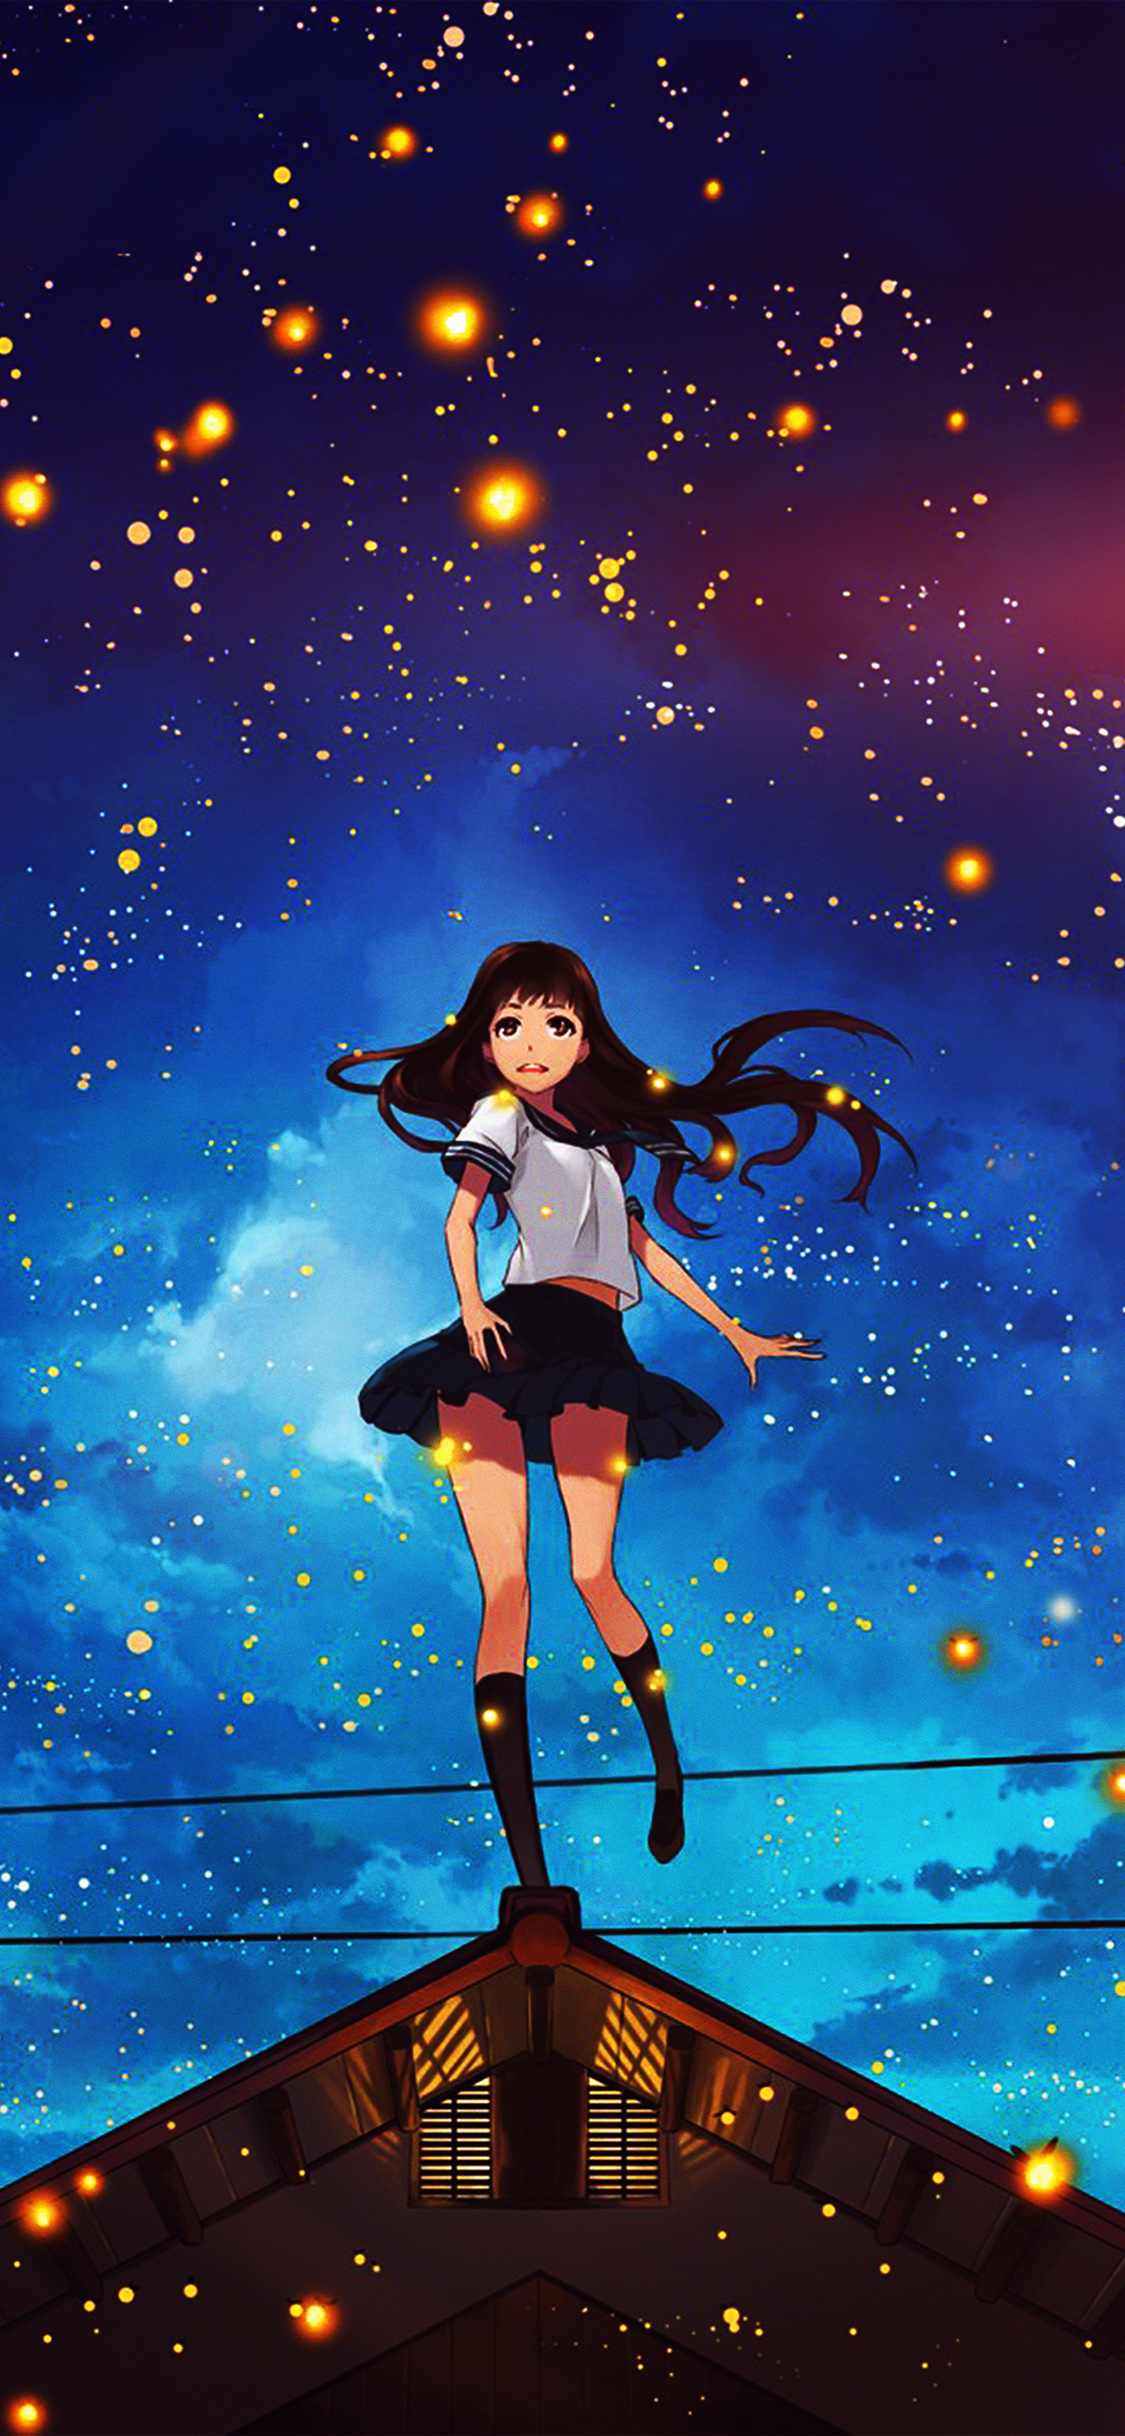 Girl anime star space night iPhone X Wallpapers Free Download